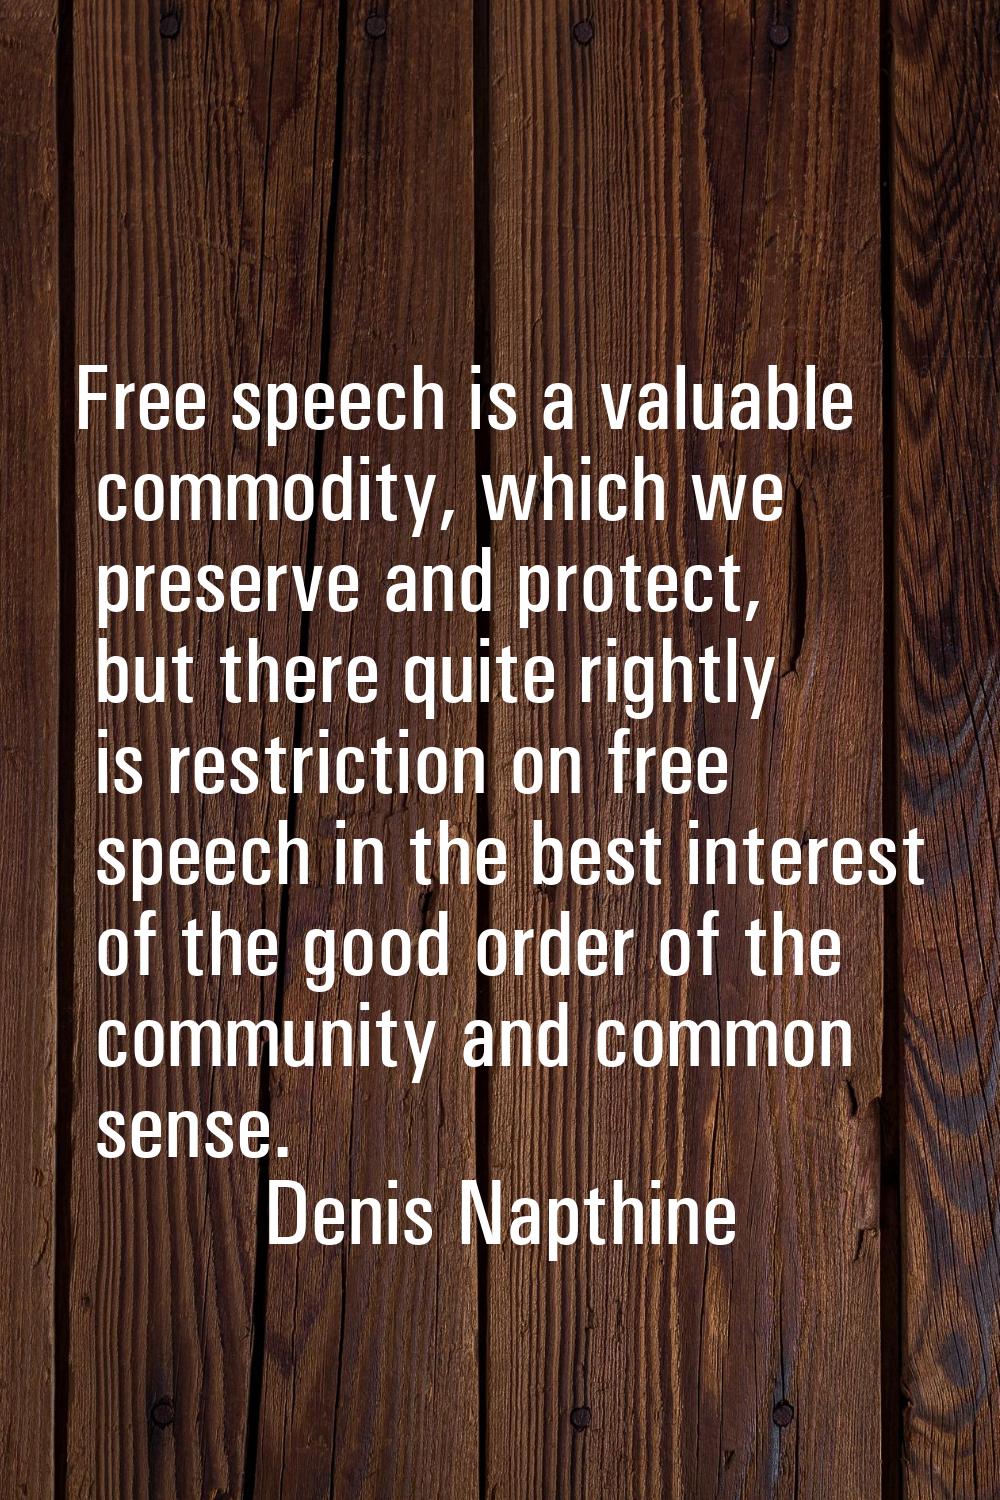 Free speech is a valuable commodity, which we preserve and protect, but there quite rightly is rest